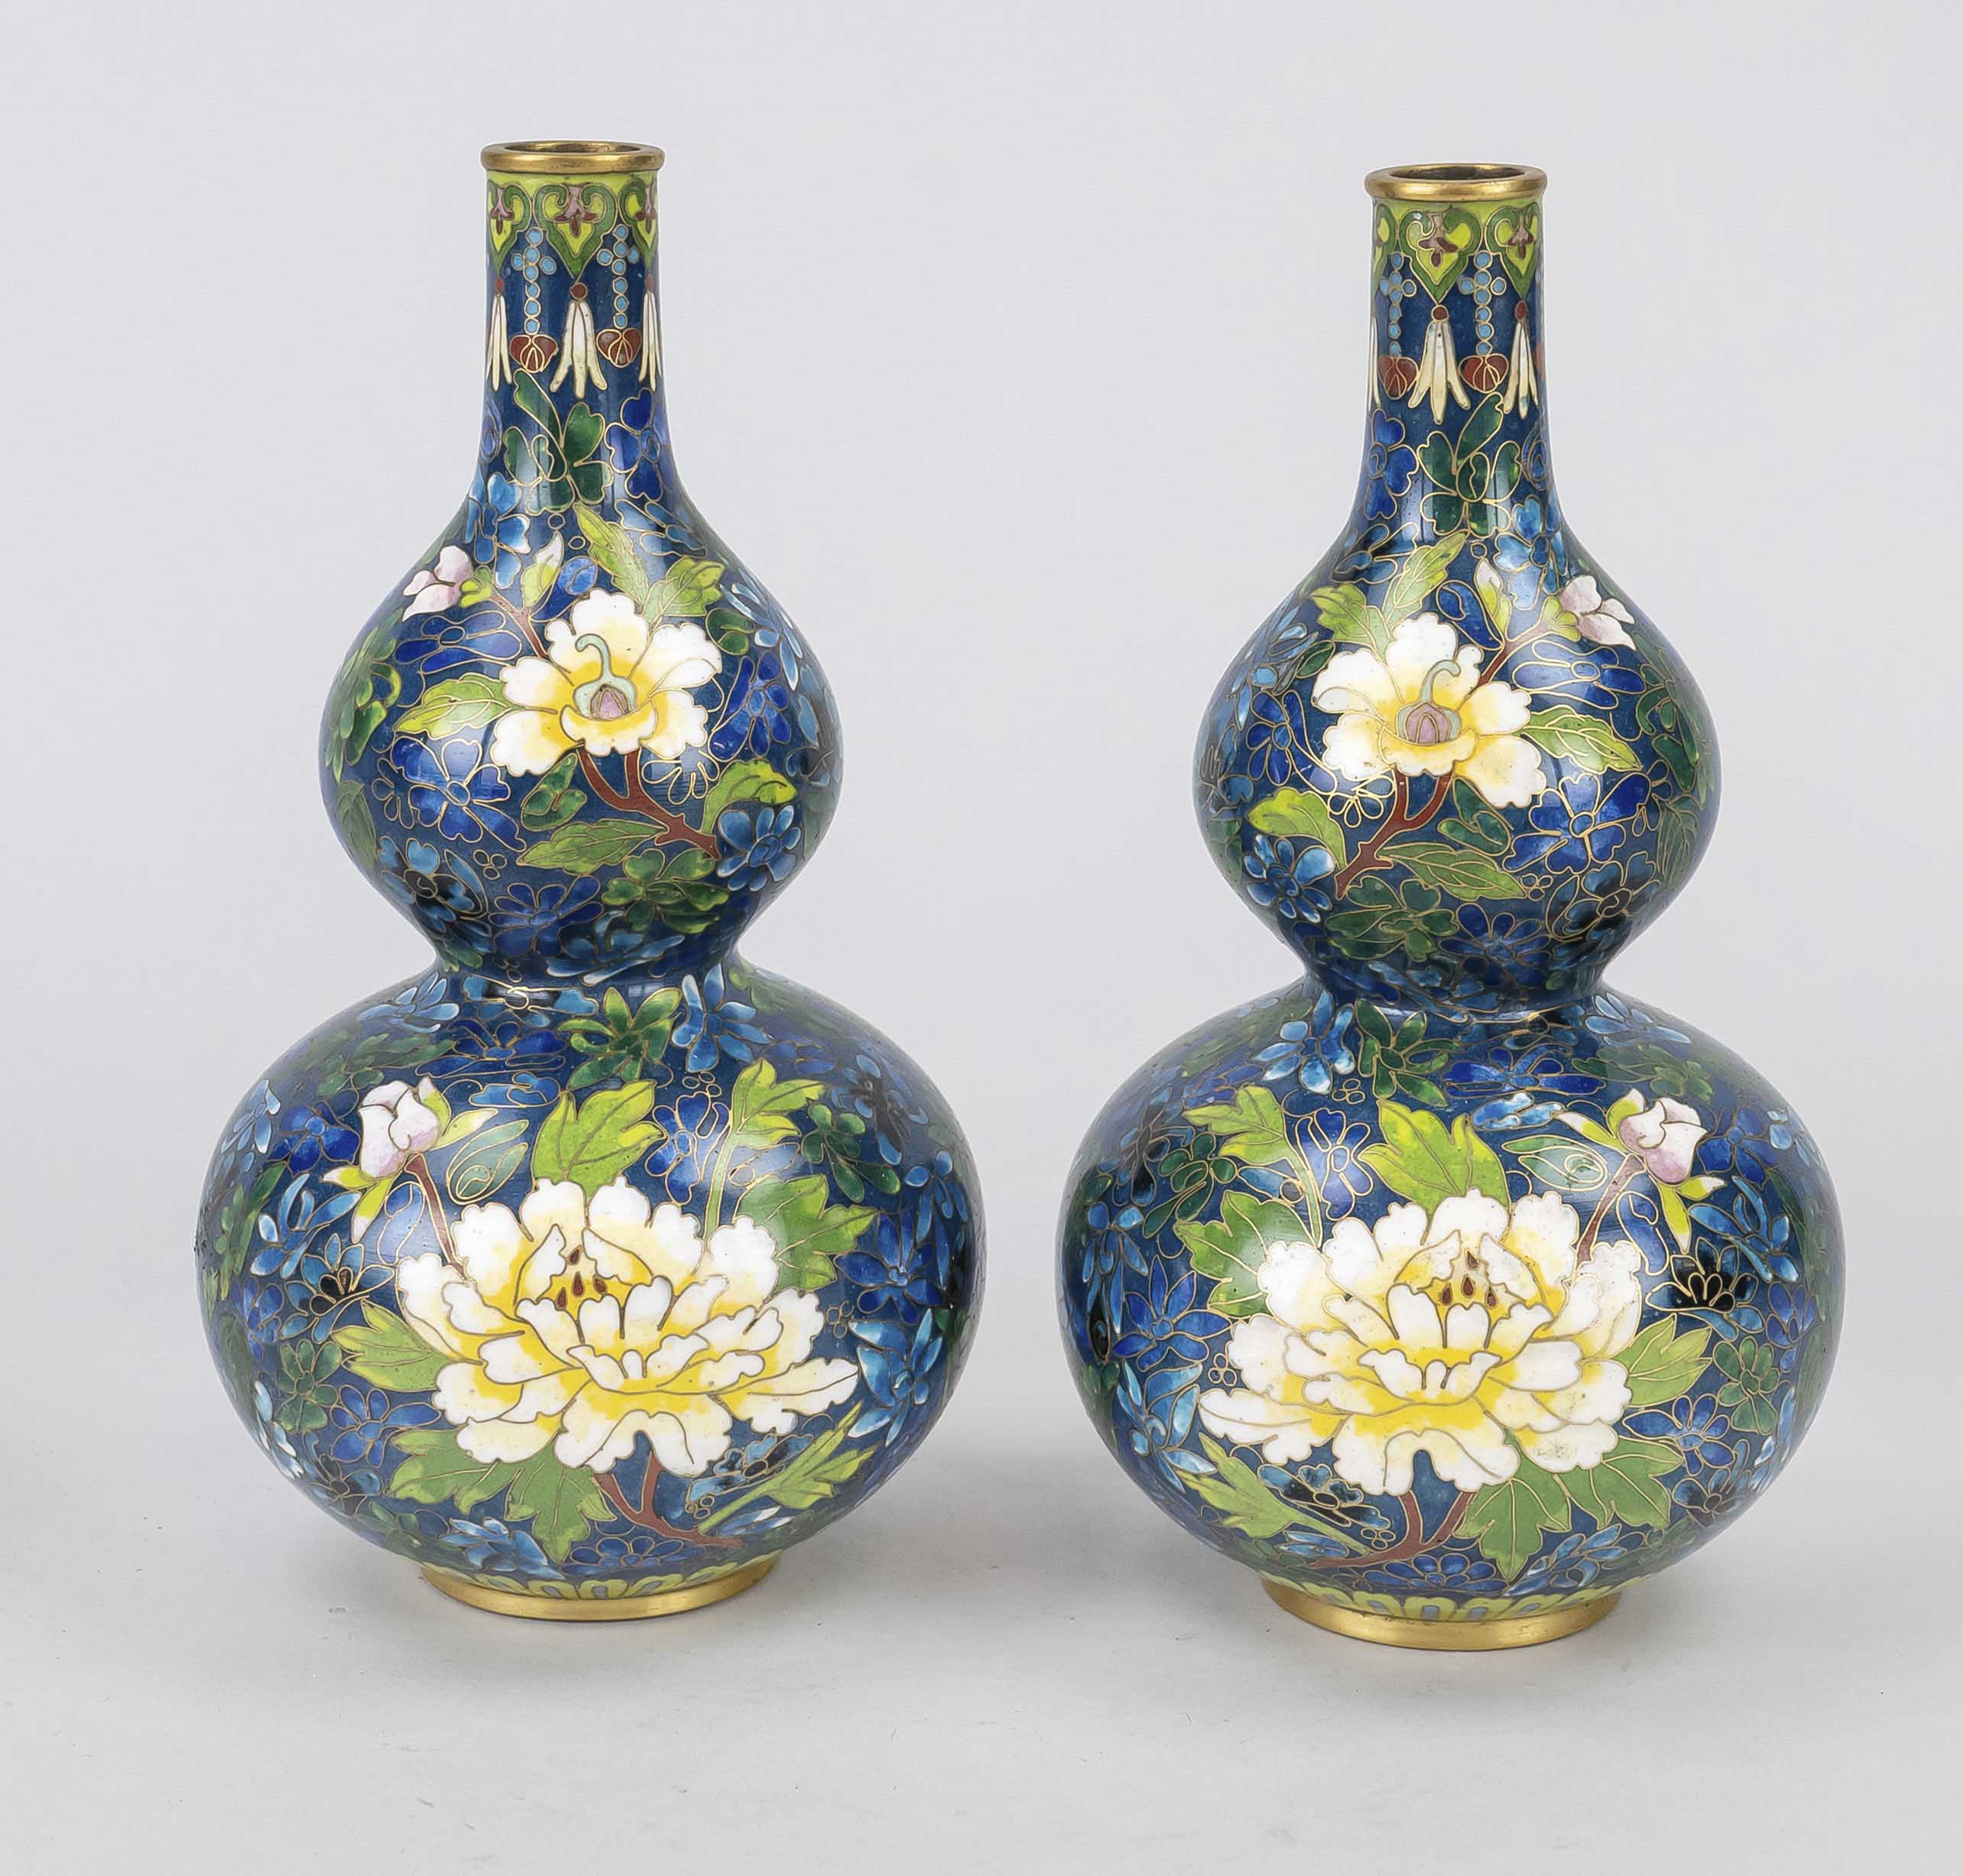 2 cloisonné gourd vases, China, brass body with floral enameled decoration, each h 18cm